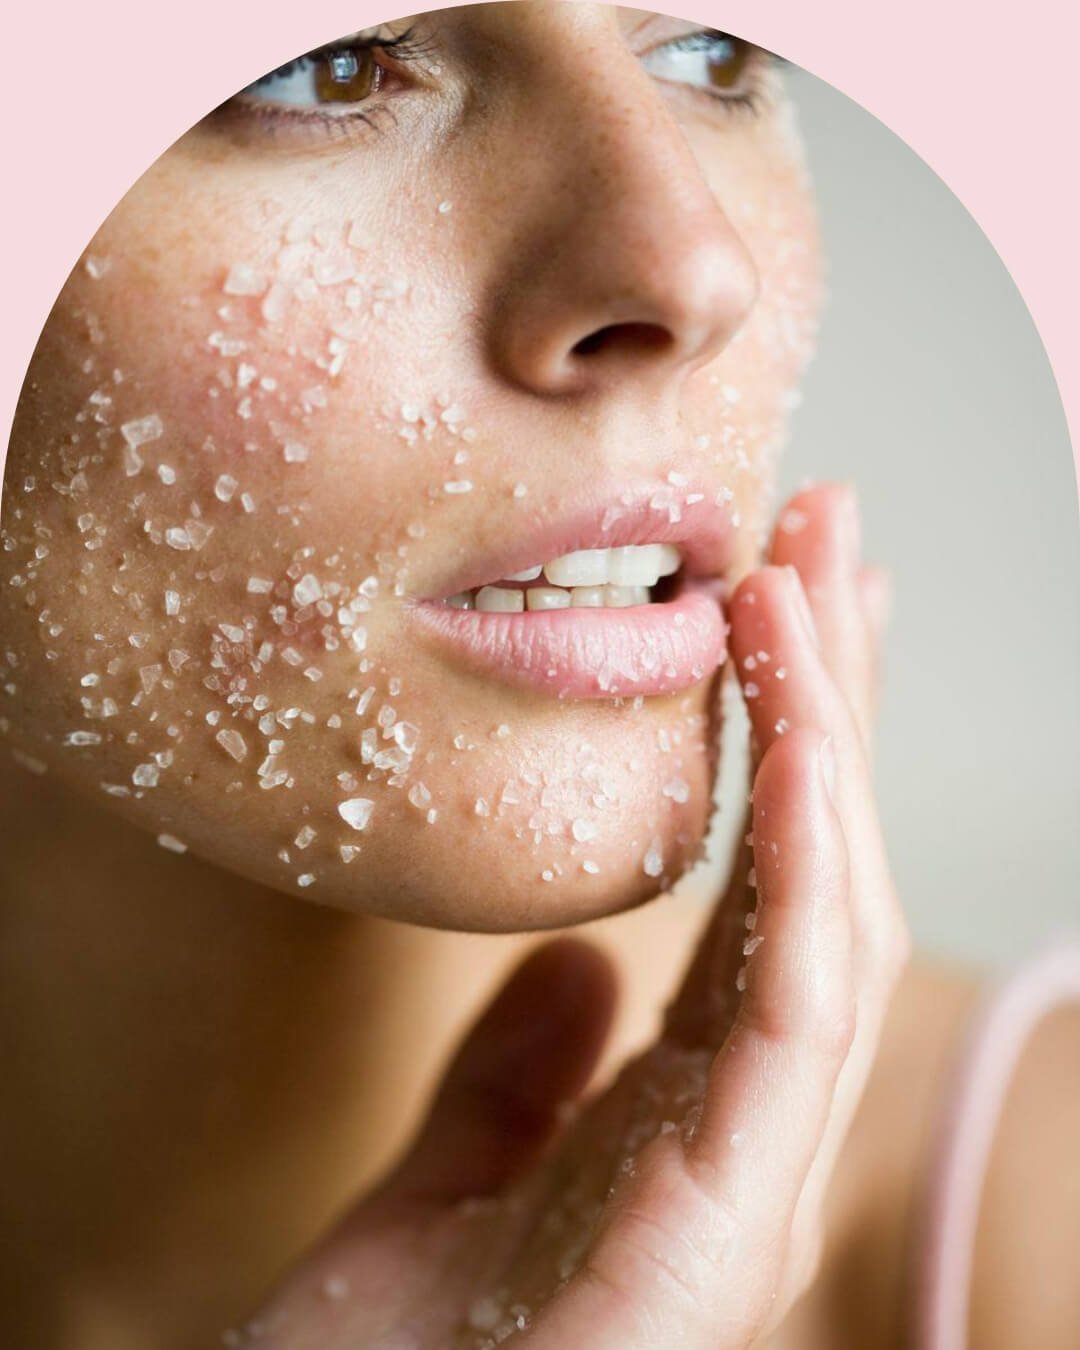 Top skincare mistakes you are making that could be damaging your skin